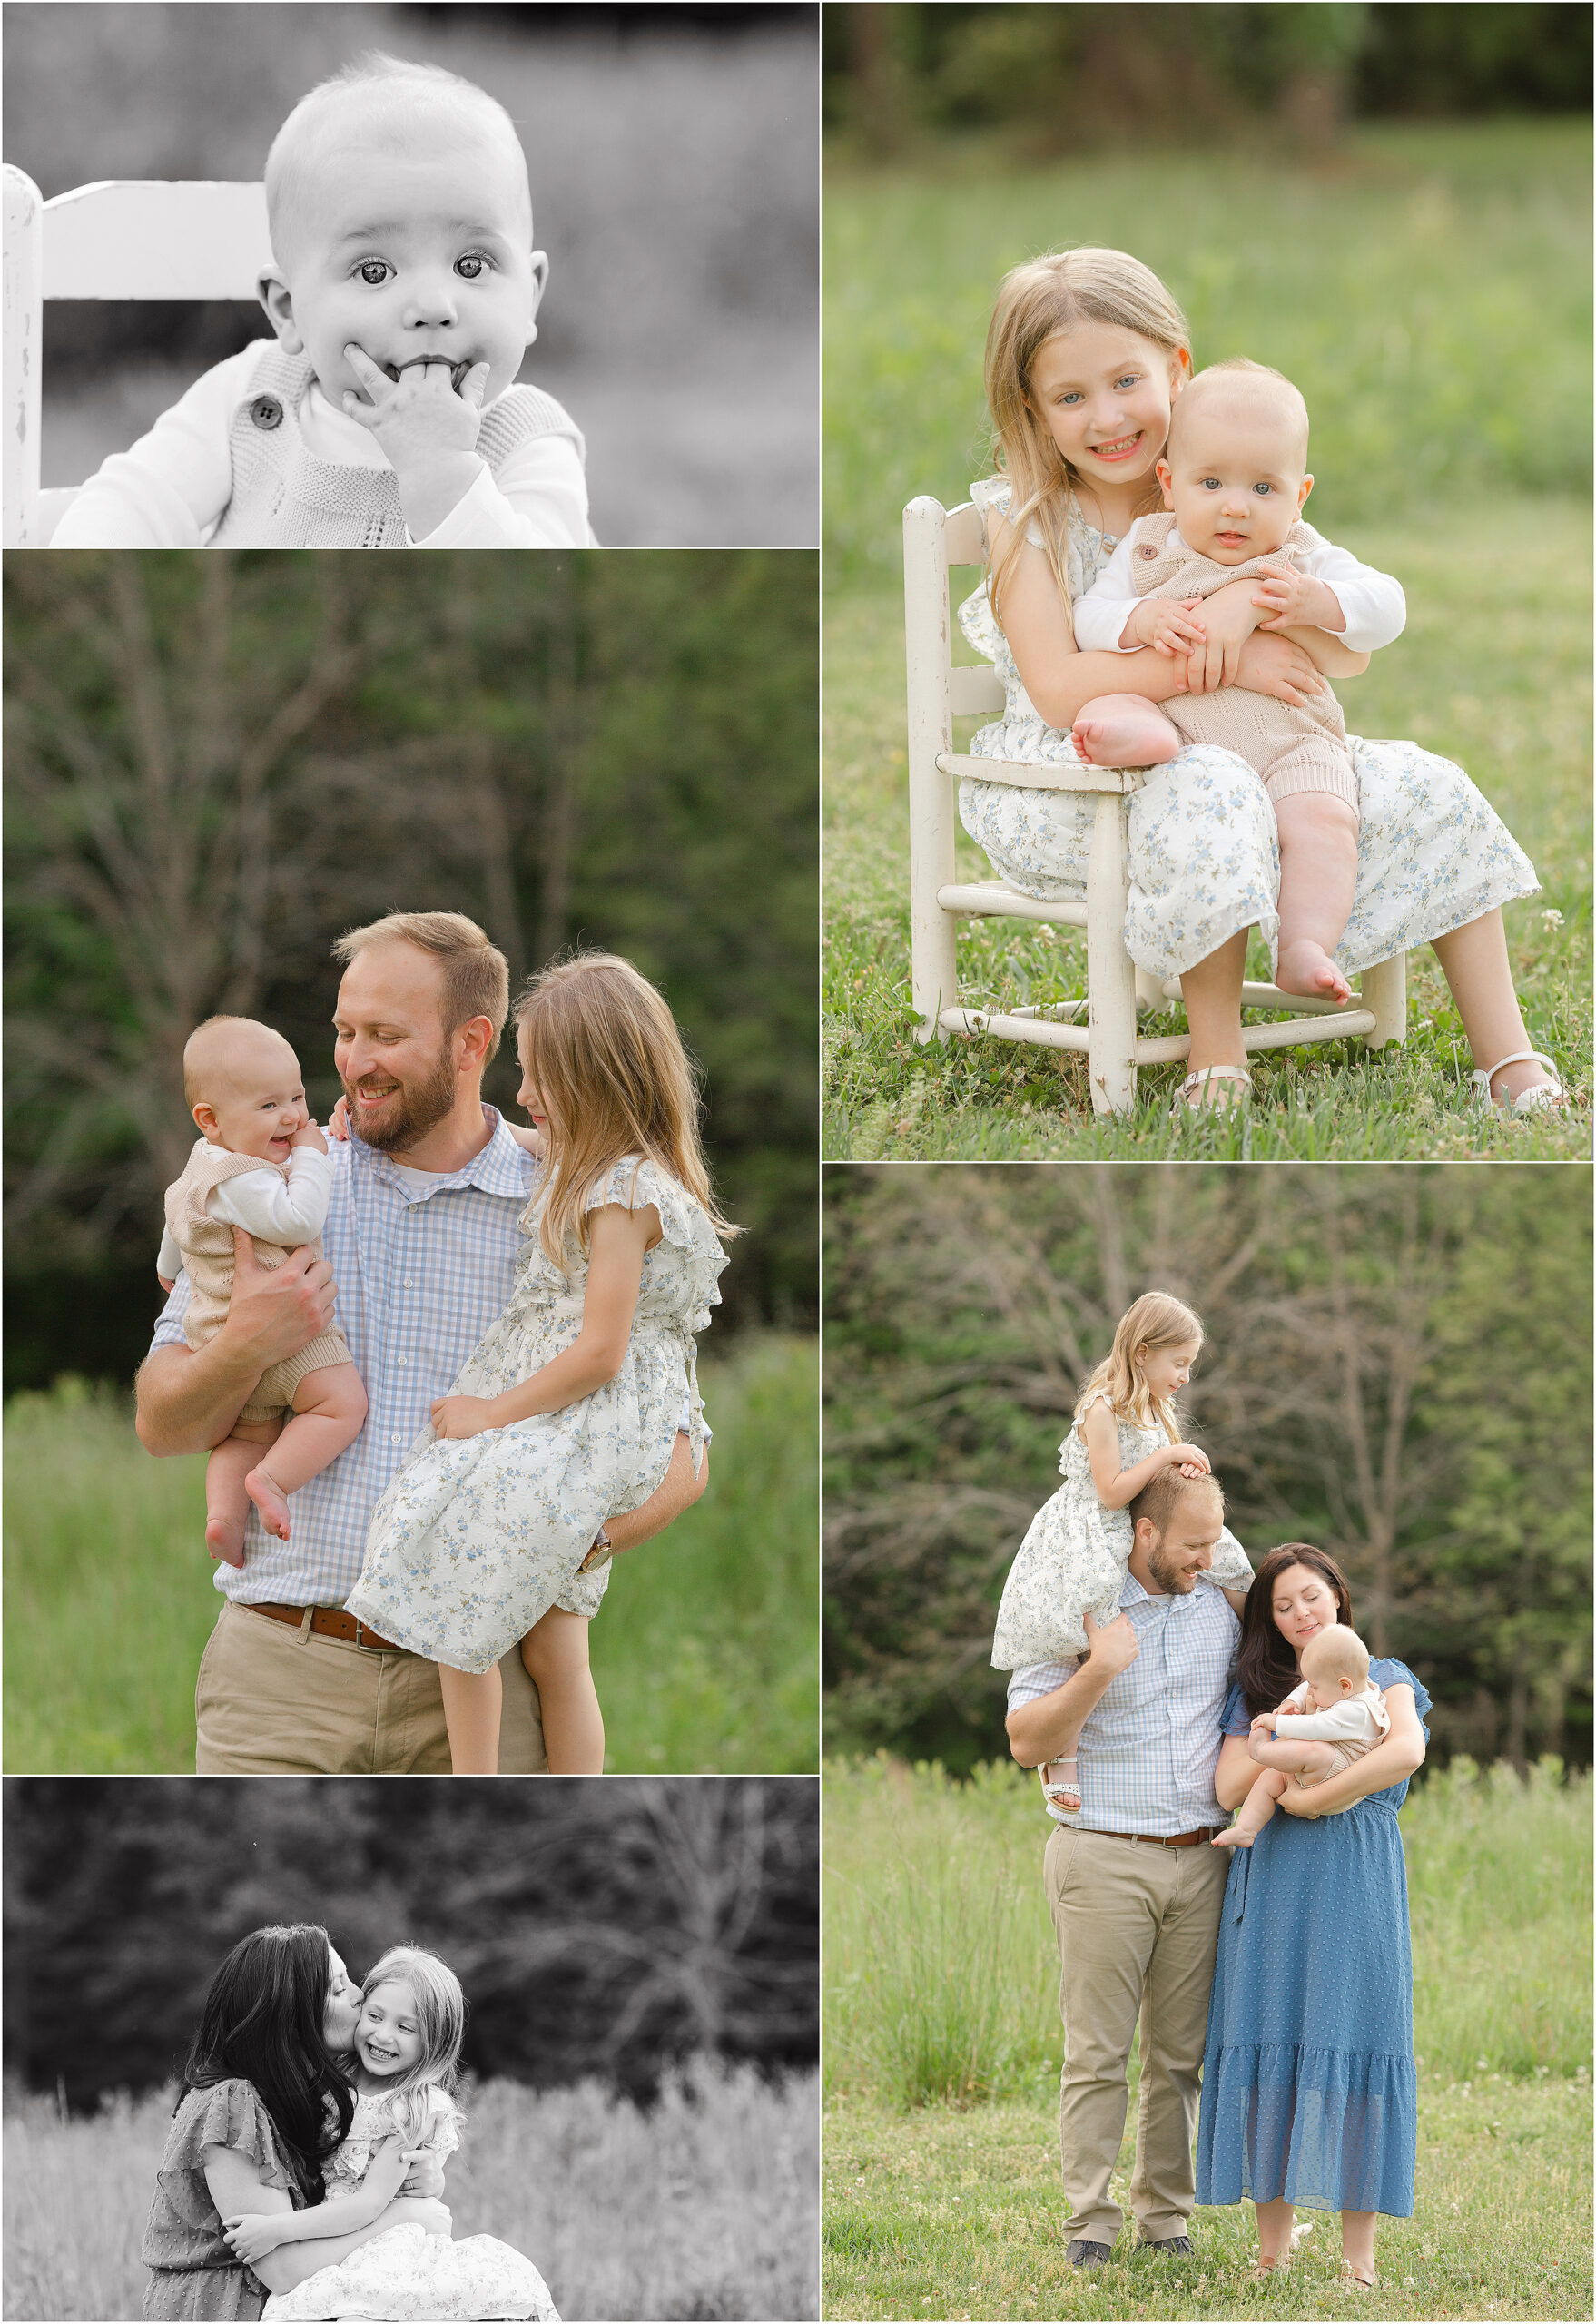 Photos of a big sister and baby brother and their parents outdoors in Wake Forest NC